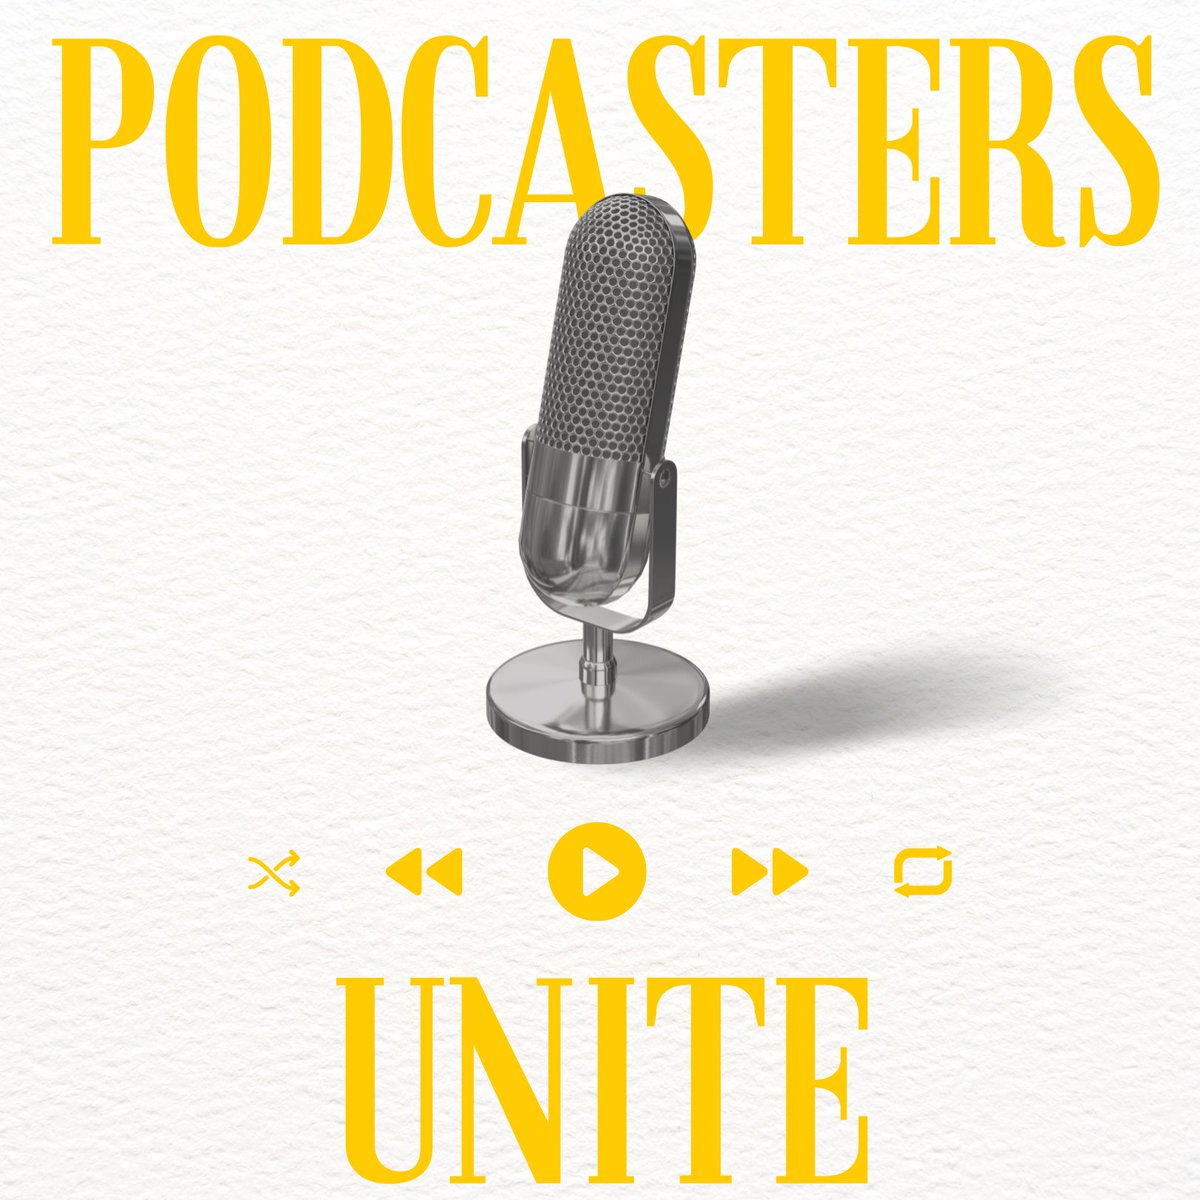 It's not about how big or small your #podcast is, but the sheer effort it takes to consistently put out content.

📣This #podcastday, we just want to give a huuuuuuge shoutout to every single #podcaster out there putting in the work! 

Here's to us🥂

#InternationalPodcastDay